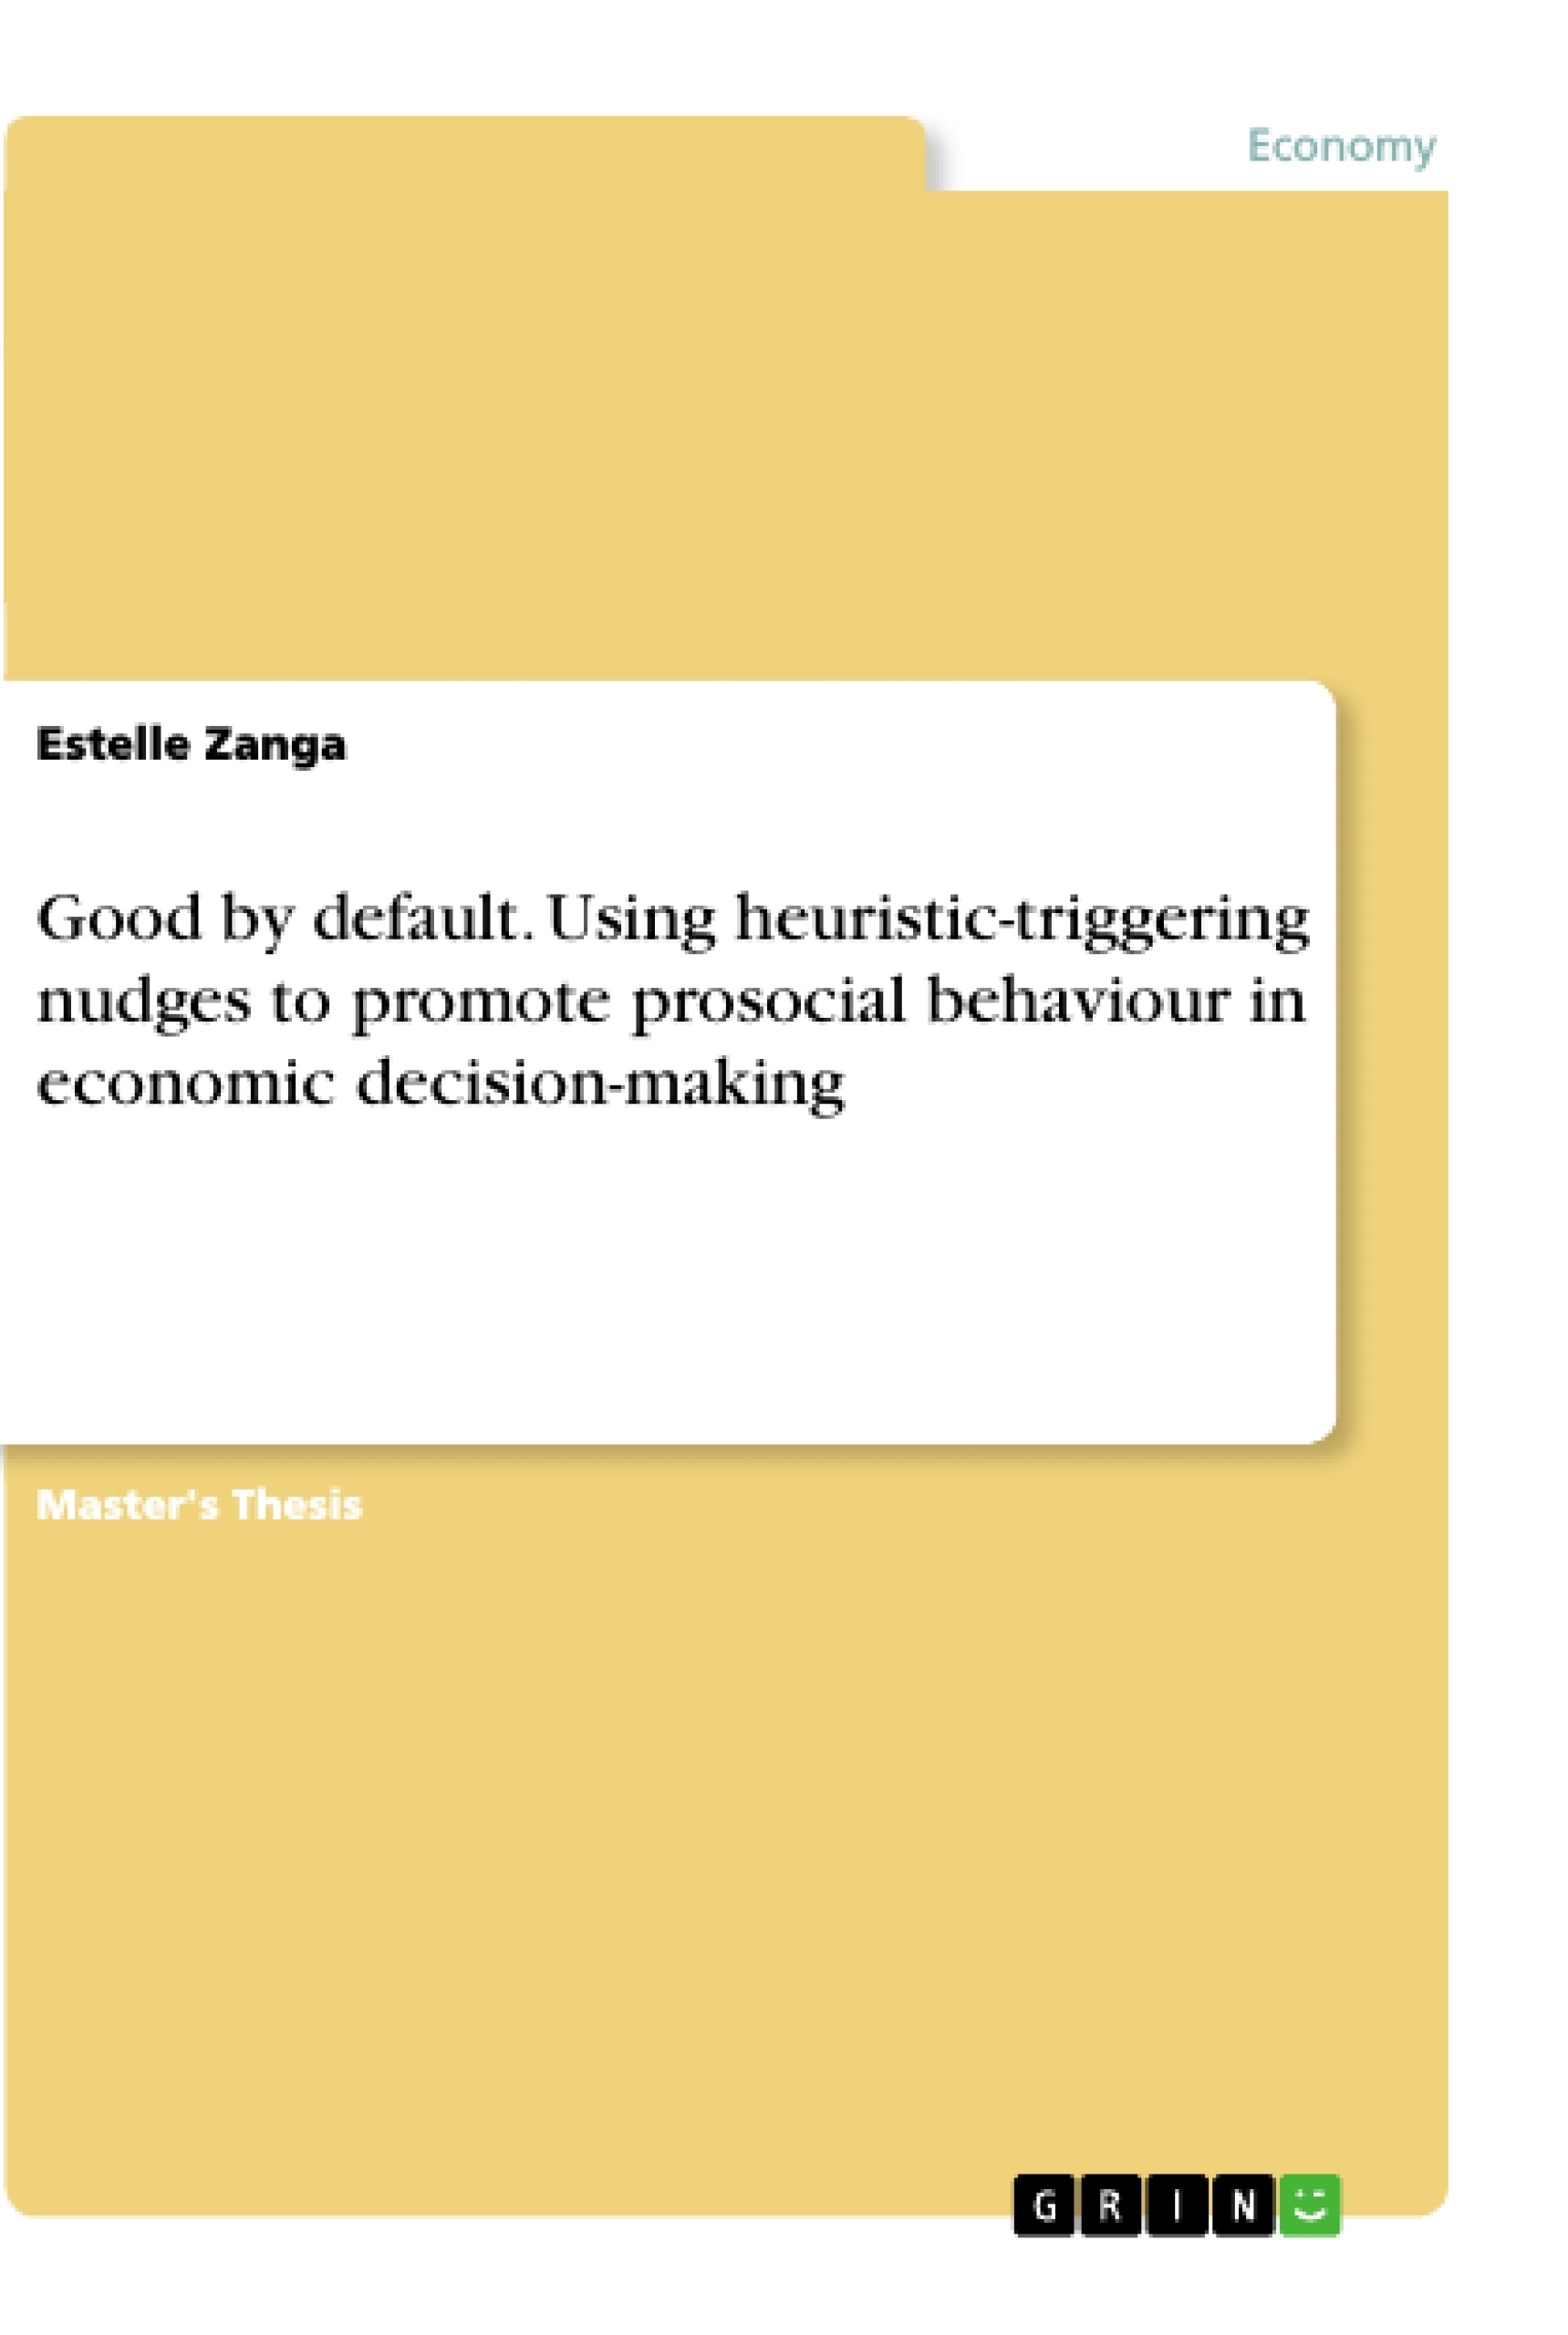 Titel: Good by default. Using heuristic-triggering nudges to promote prosocial behaviour in economic decision-making